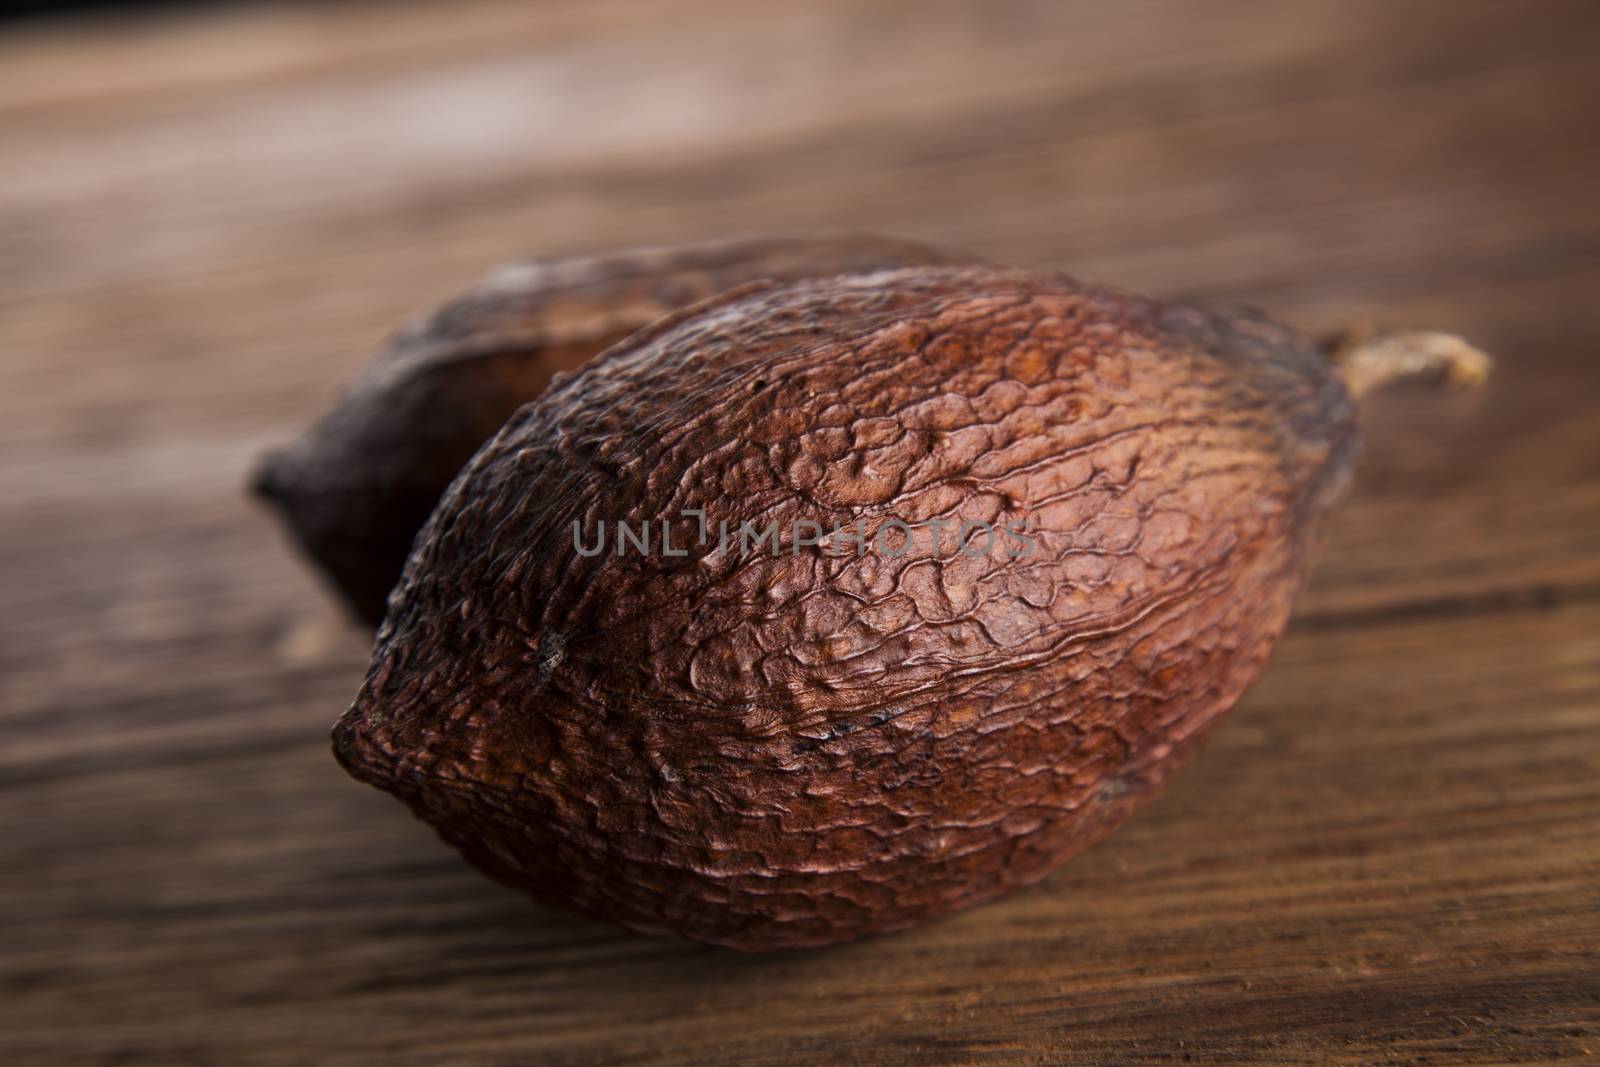 Cocoa pod on wooden table